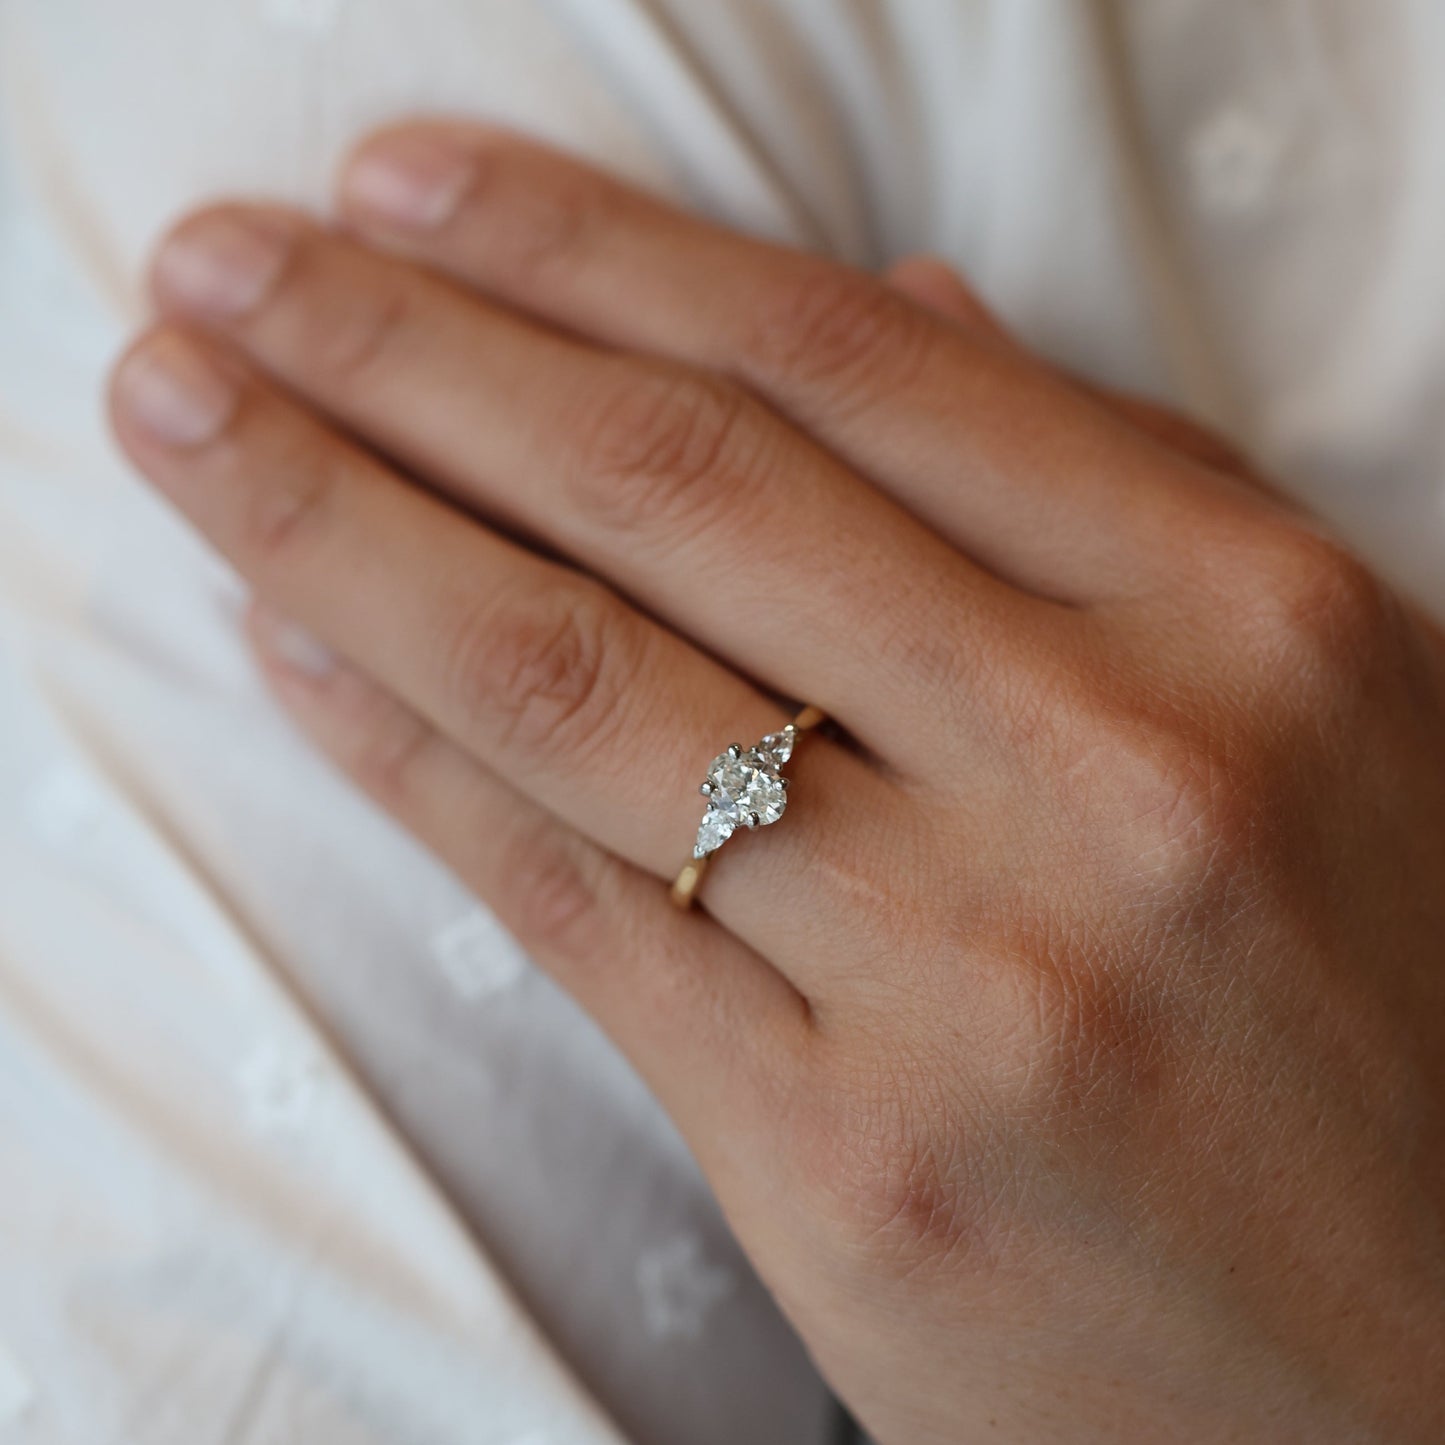 The "Tranquility" with Oval & Pear Shaped Diamonds